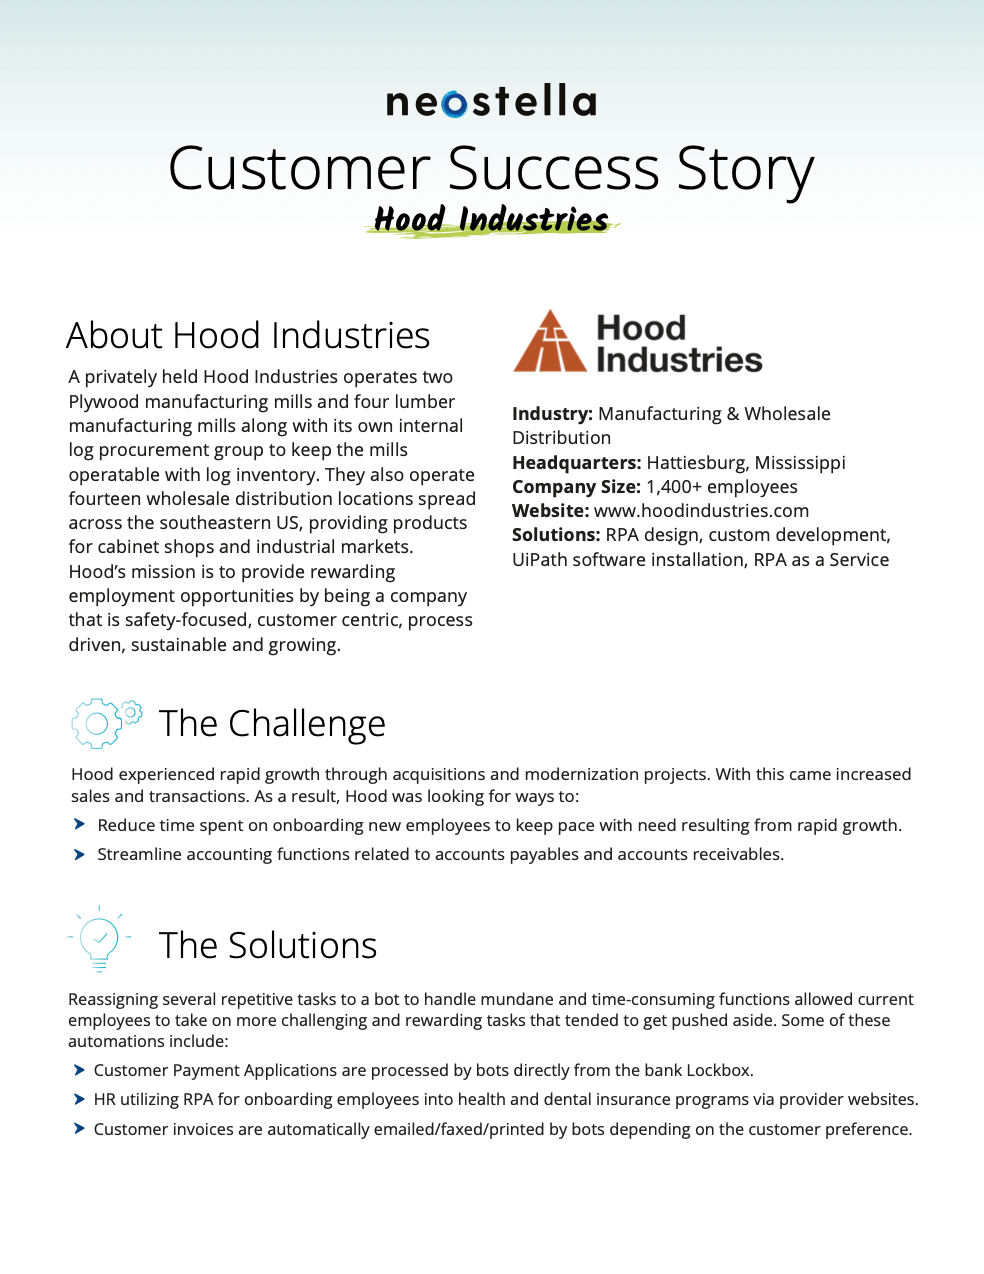 A preview of the customer story download for Hood Industries and their experience using RPA to speed up operations during a period of rapid growth